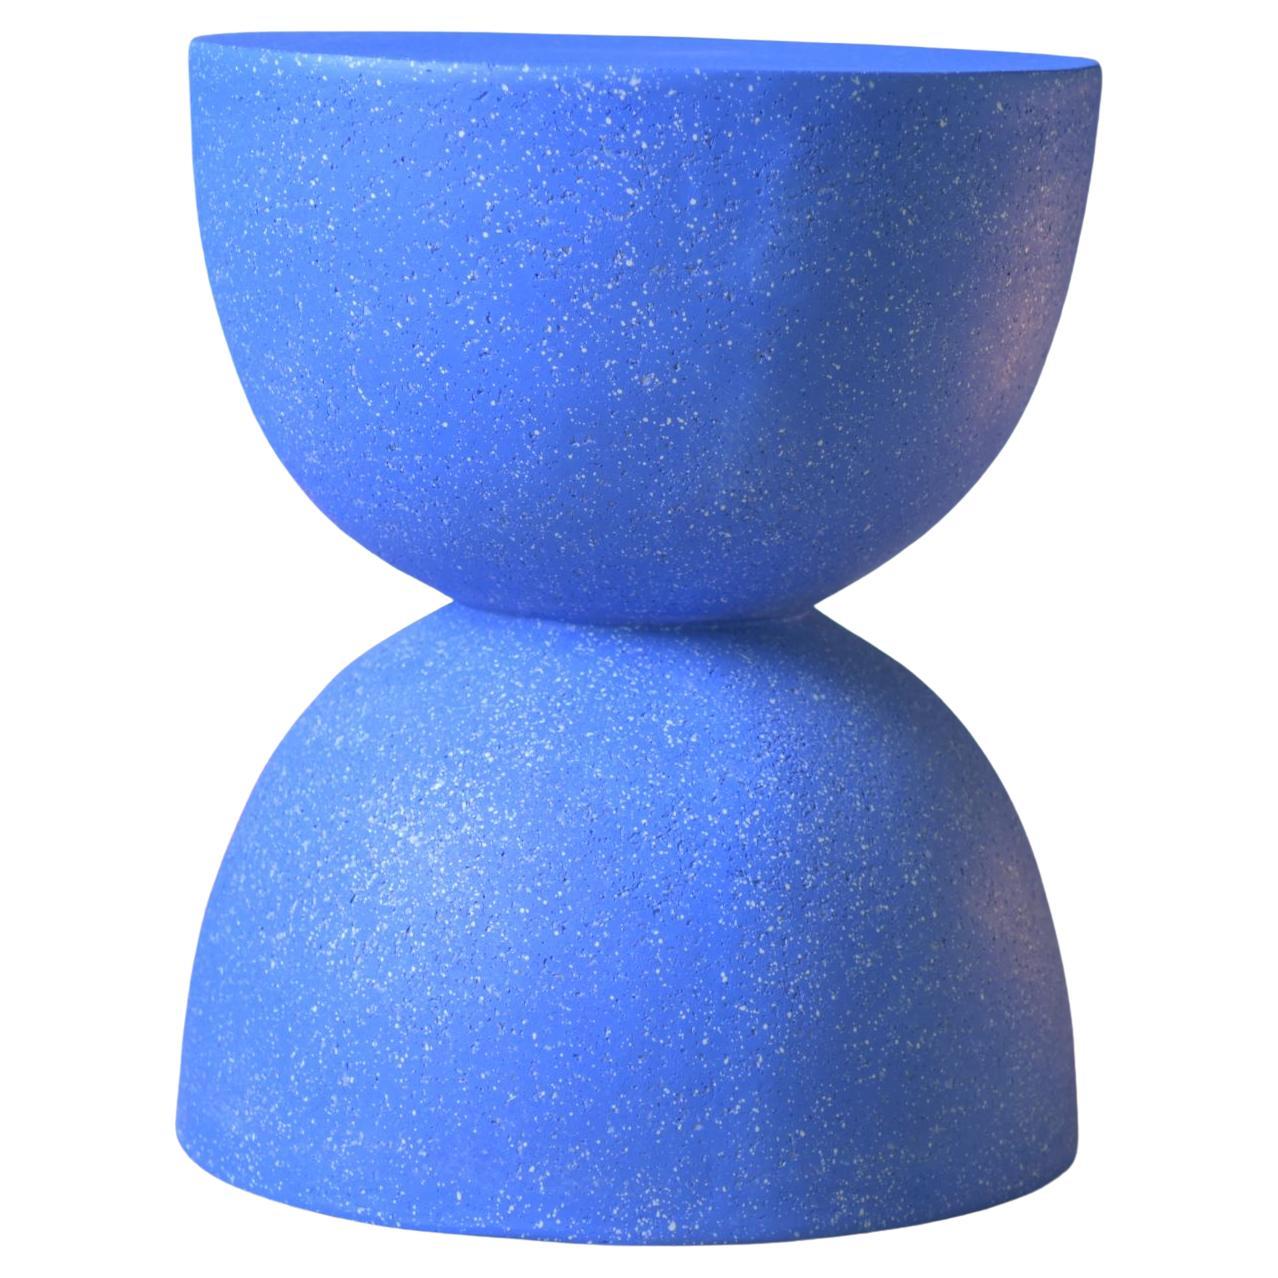 Cast Resin 'Bilbouquet' Side Table, Lupine Blue Finish by Zachary A. Design For Sale